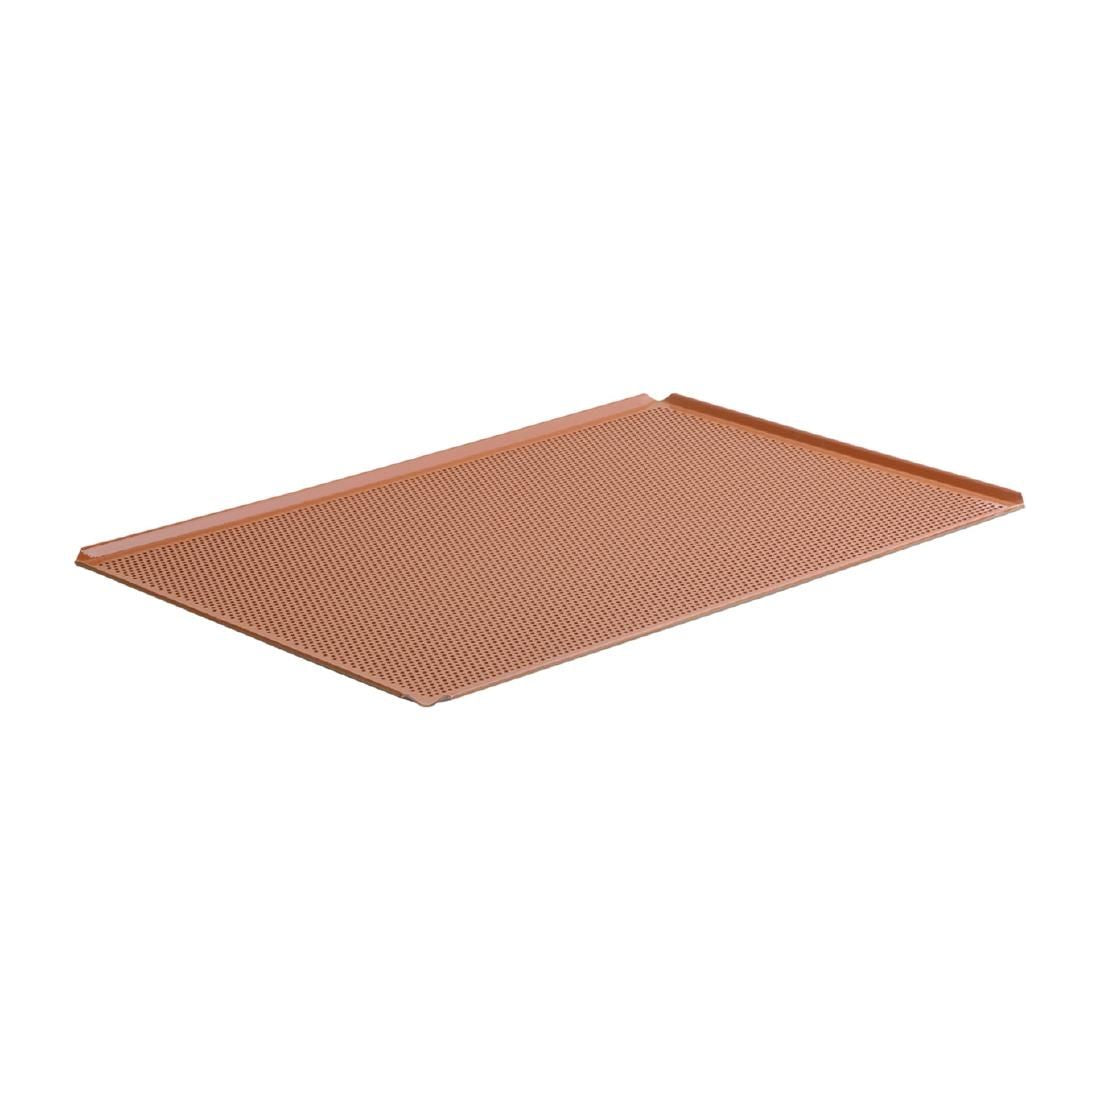 CW322 Schneider Non-Stick Perforated Baking Tray 600 x 400mm JD Catering Equipment Solutions Ltd